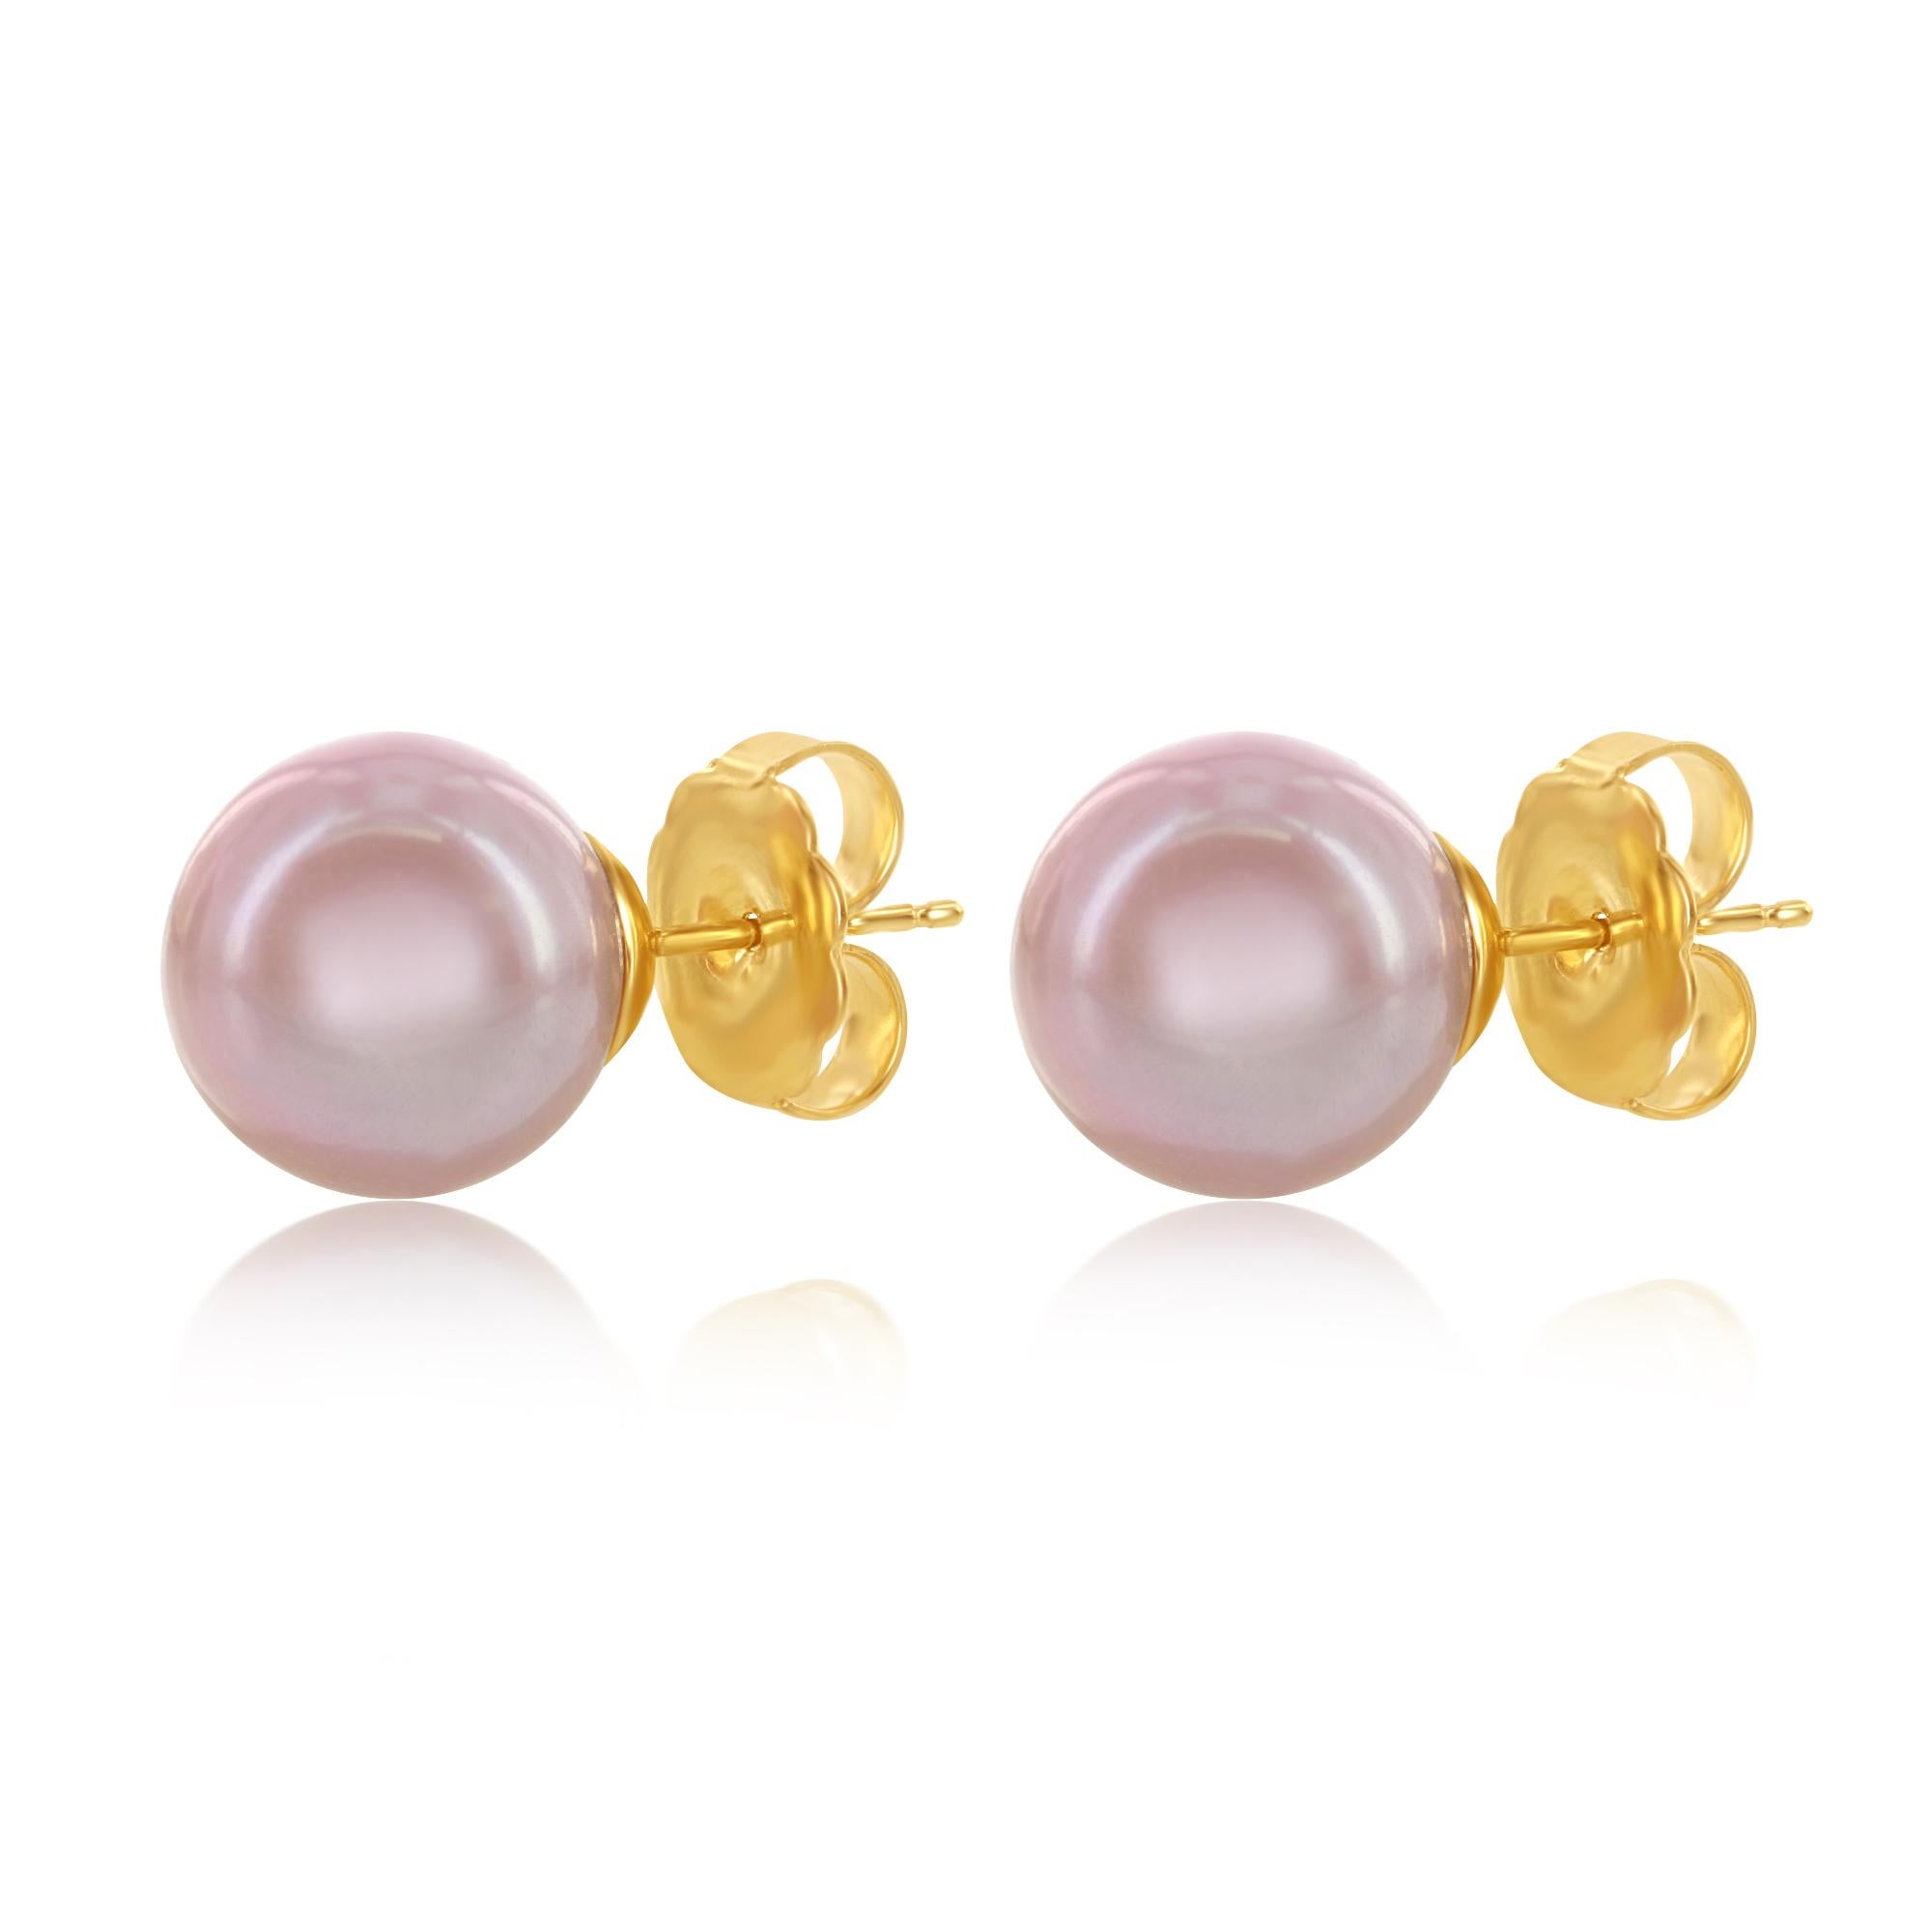 These Chinese freshwater cultured pearls are an exquisite natural pink color. 
The round pearls measure 9-9.5mm and are set on 14 karat yellow gold.
These earrings are great for everyday casual elegance or dressing up!